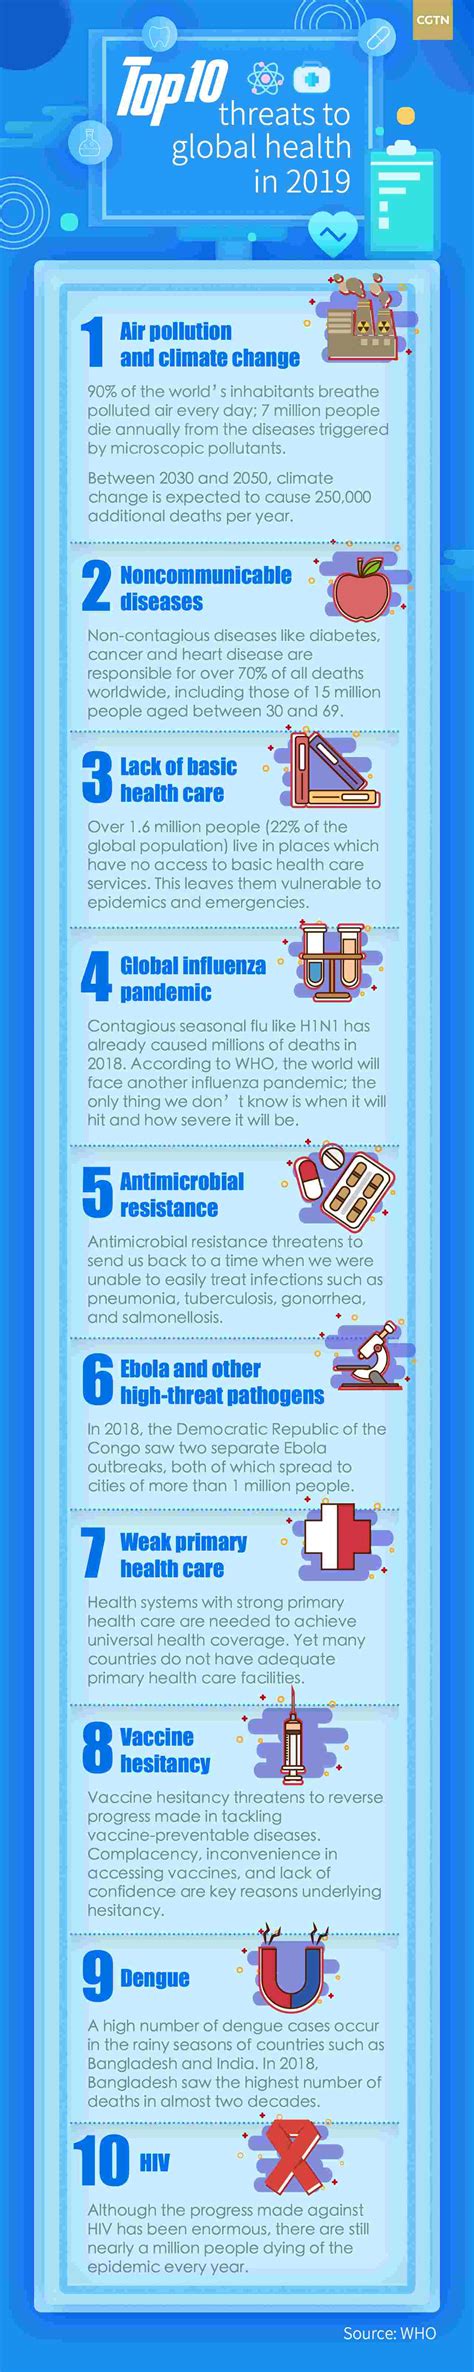 top 10 threats to global health in 2019 at a glance cgtn